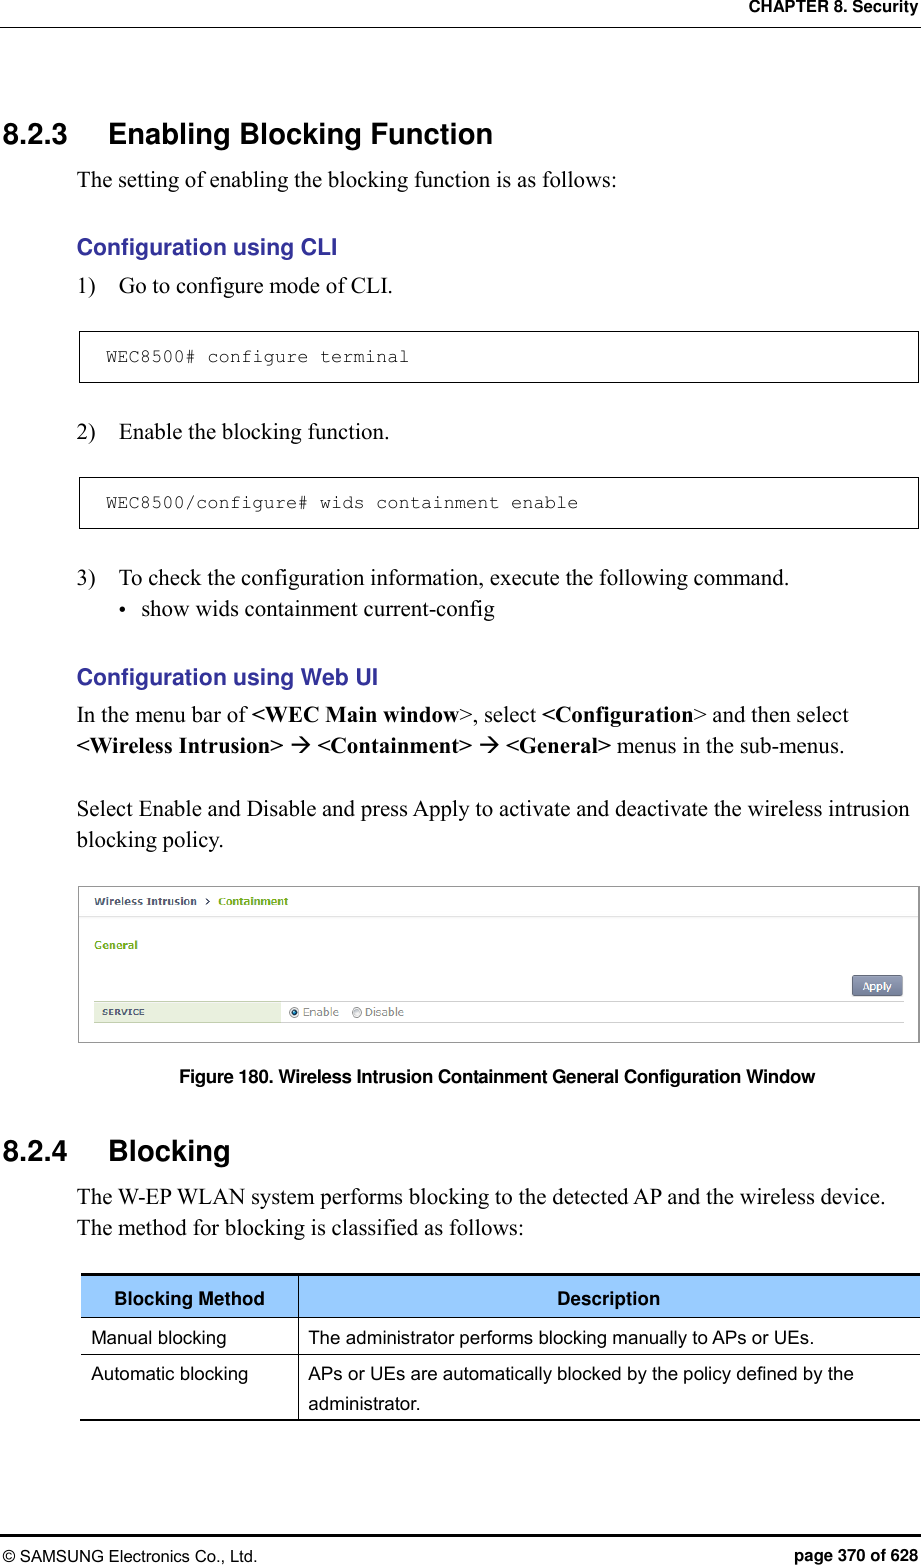 CHAPTER 8. Security © SAMSUNG Electronics Co., Ltd.  page 370 of 628 8.2.3  Enabling Blocking Function The setting of enabling the blocking function is as follows:  Configuration using CLI 1)    Go to configure mode of CLI.  WEC8500# configure terminal  2)    Enable the blocking function.  WEC8500/configure# wids containment enable  3)    To check the configuration information, execute the following command.  show wids containment current-config  Configuration using Web UI In the menu bar of &lt;WEC Main window&gt;, select &lt;Configuration&gt; and then select &lt;Wireless Intrusion&gt;  &lt;Containment&gt;  &lt;General&gt; menus in the sub-menus.  Select Enable and Disable and press Apply to activate and deactivate the wireless intrusion blocking policy.  Figure 180. Wireless Intrusion Containment General Configuration Window  8.2.4  Blocking The W-EP WLAN system performs blocking to the detected AP and the wireless device. The method for blocking is classified as follows:  Blocking Method Description Manual blocking The administrator performs blocking manually to APs or UEs. Automatic blocking APs or UEs are automatically blocked by the policy defined by the administrator.  